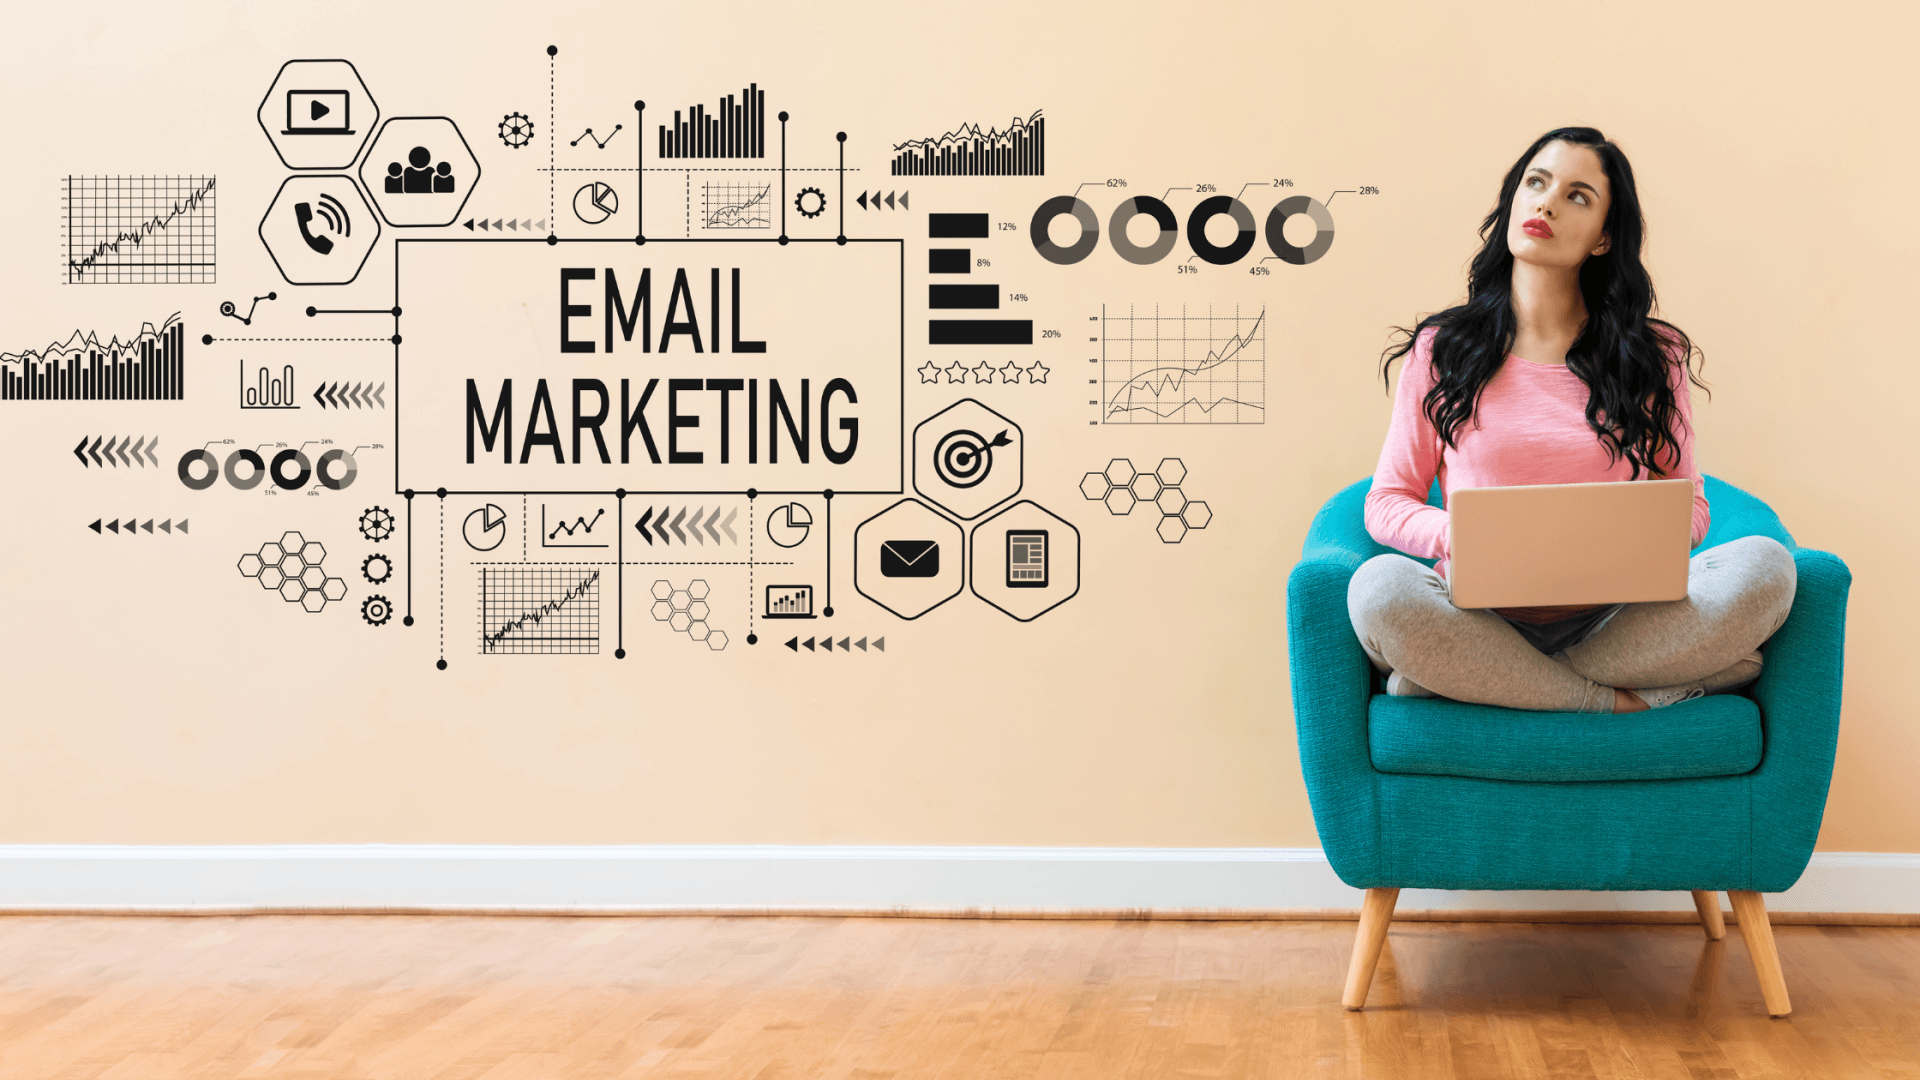 Email Marketing for freelancers